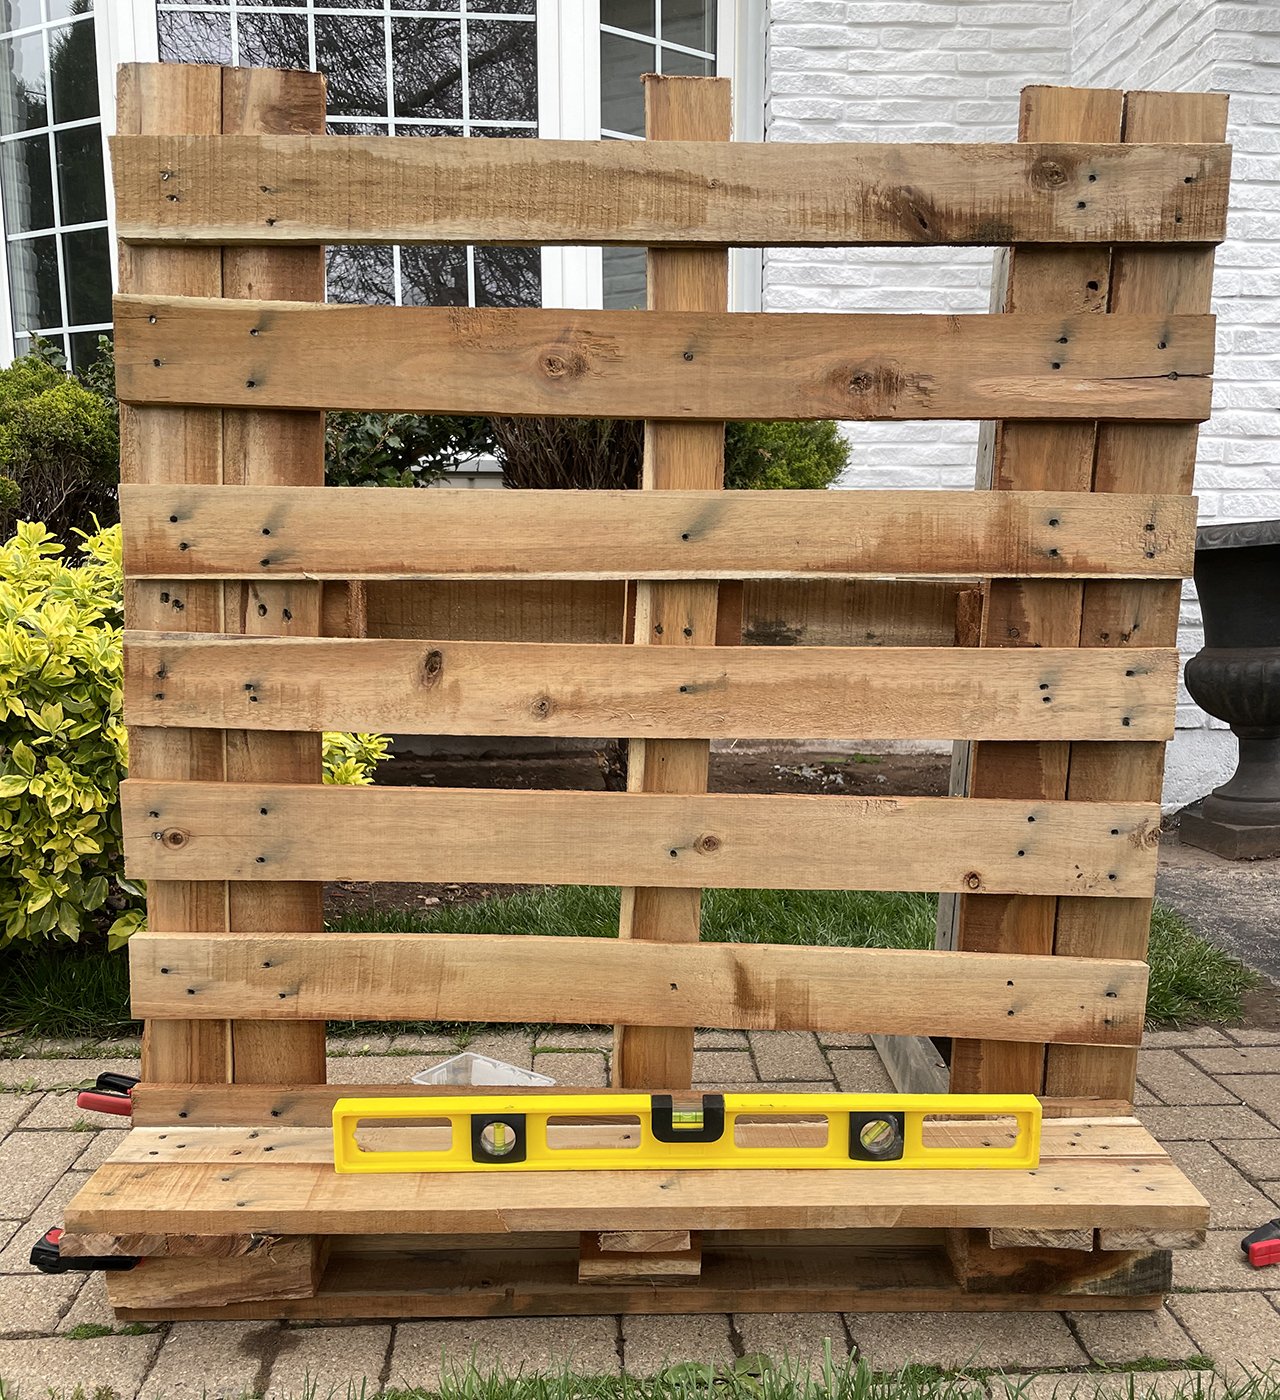 Adding bar step to the pallets